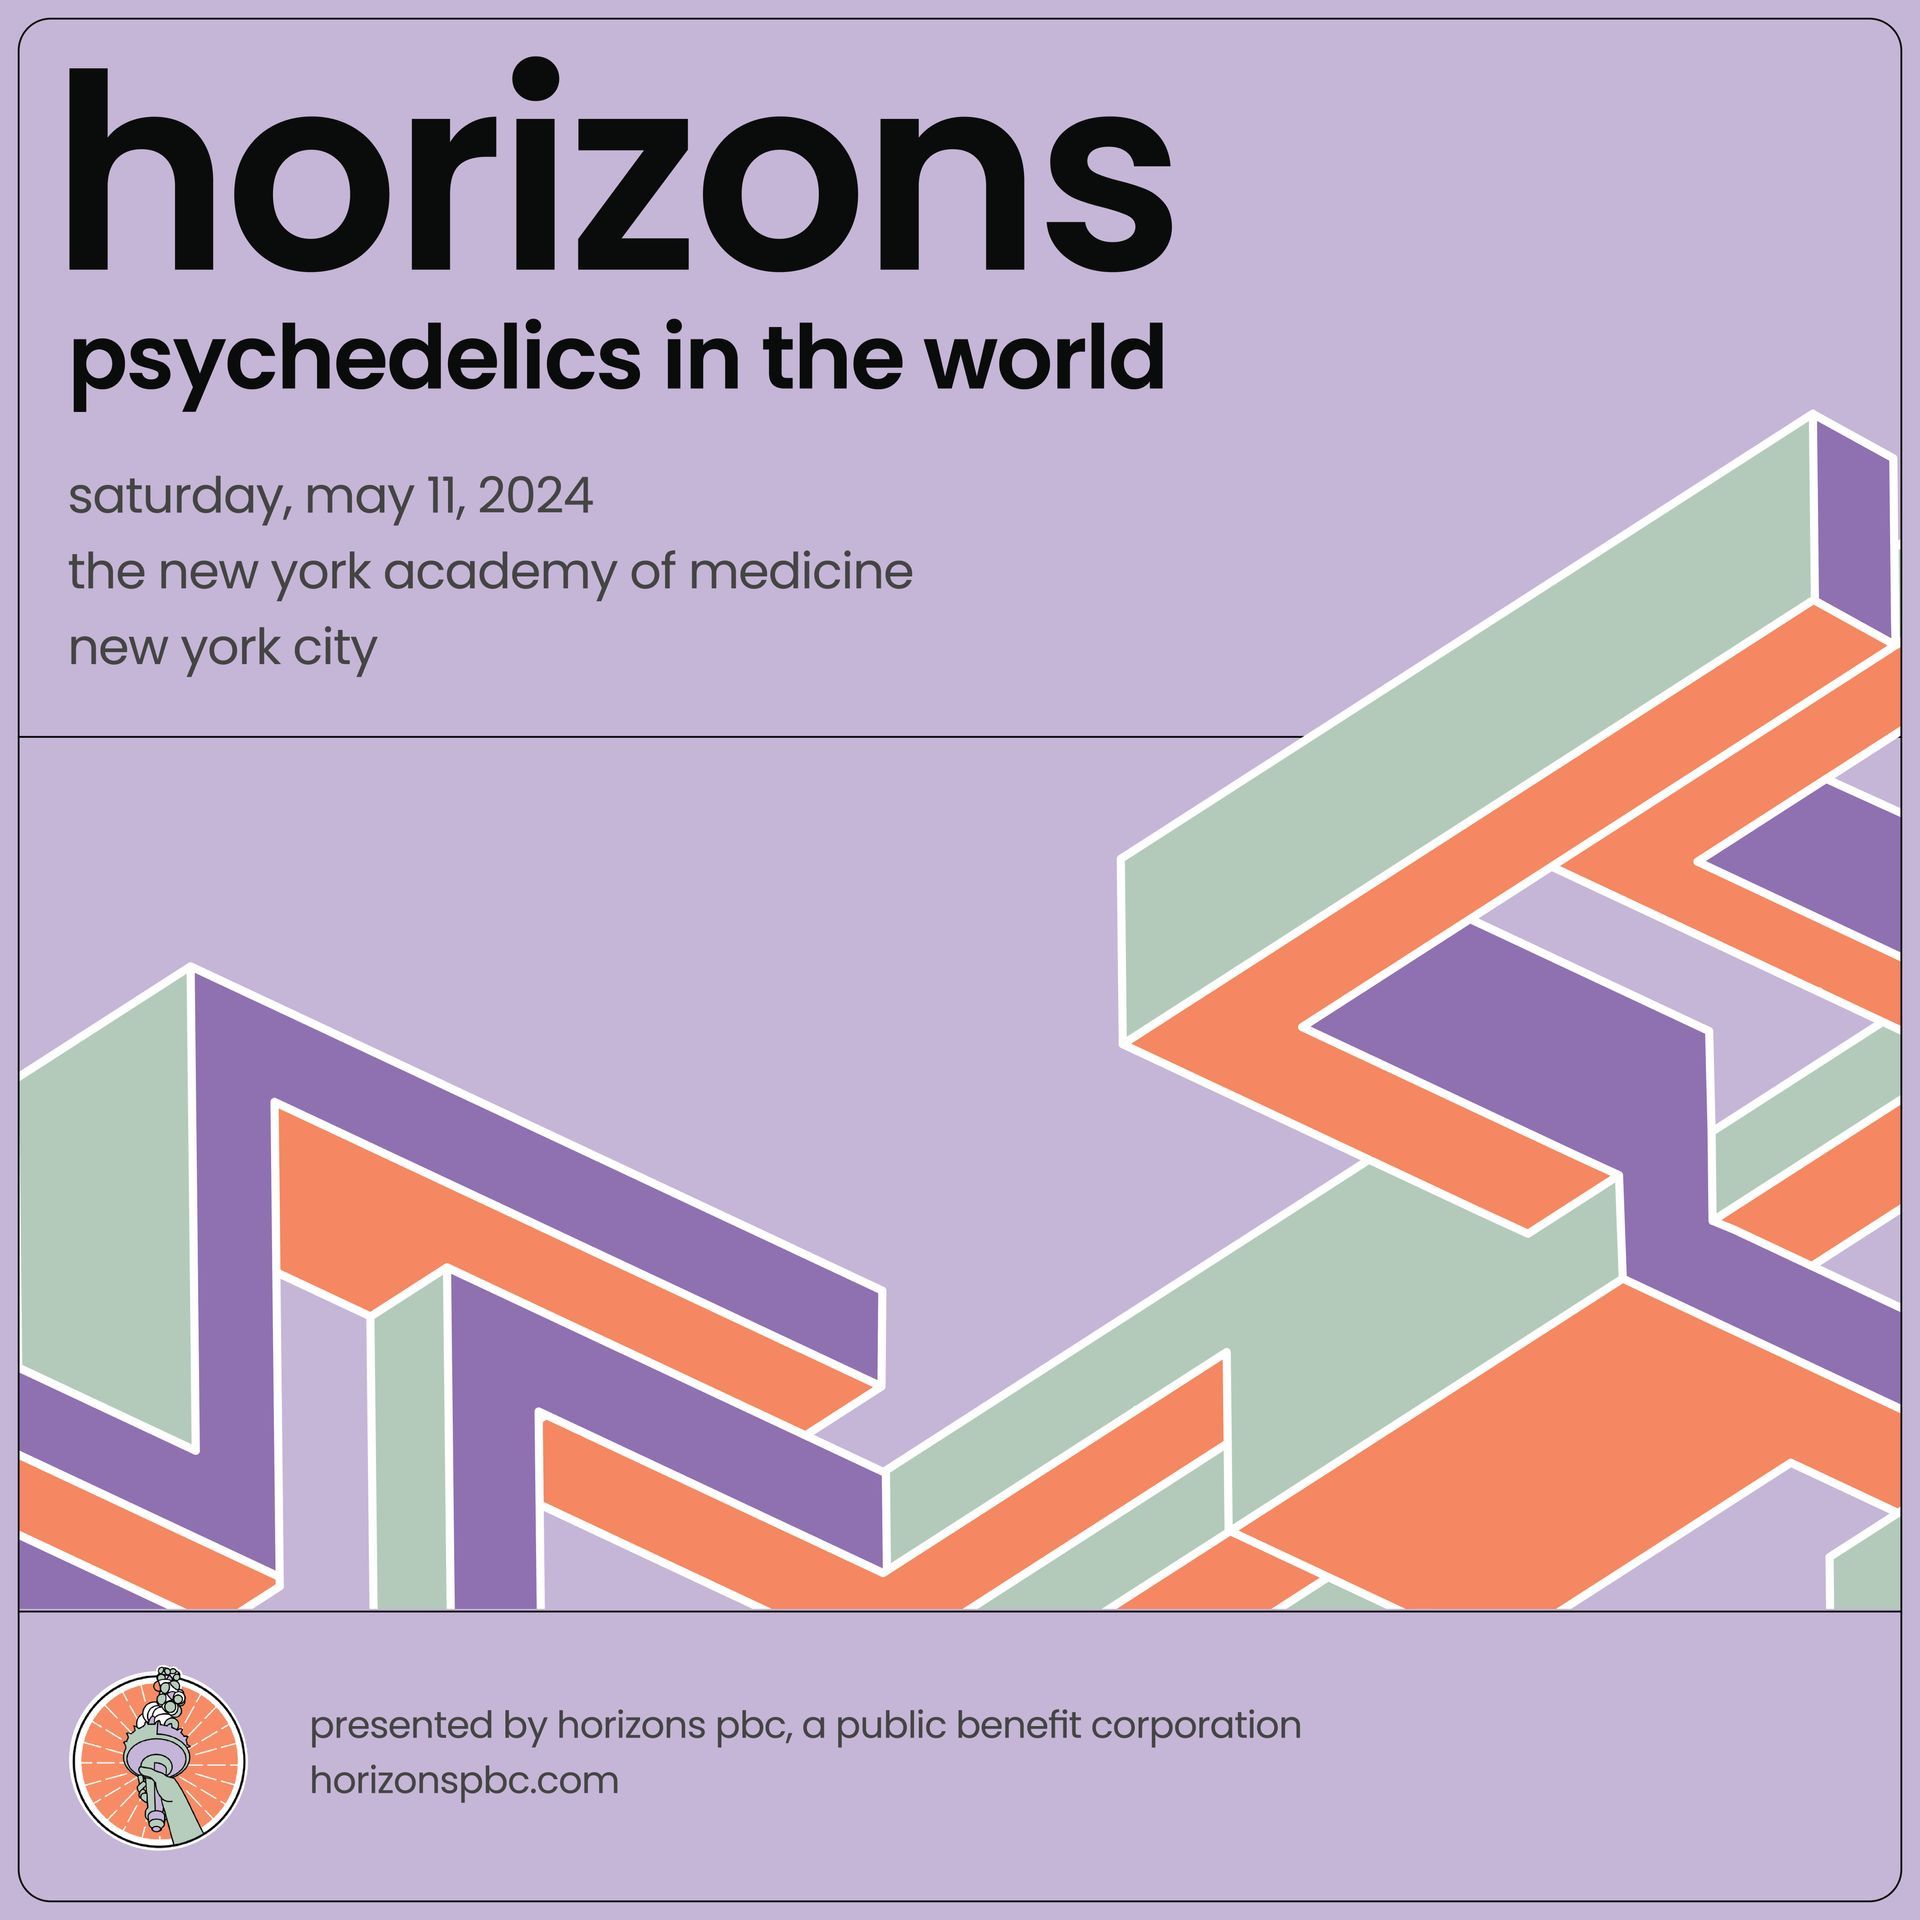 A poster for horizons psychedelics in the world